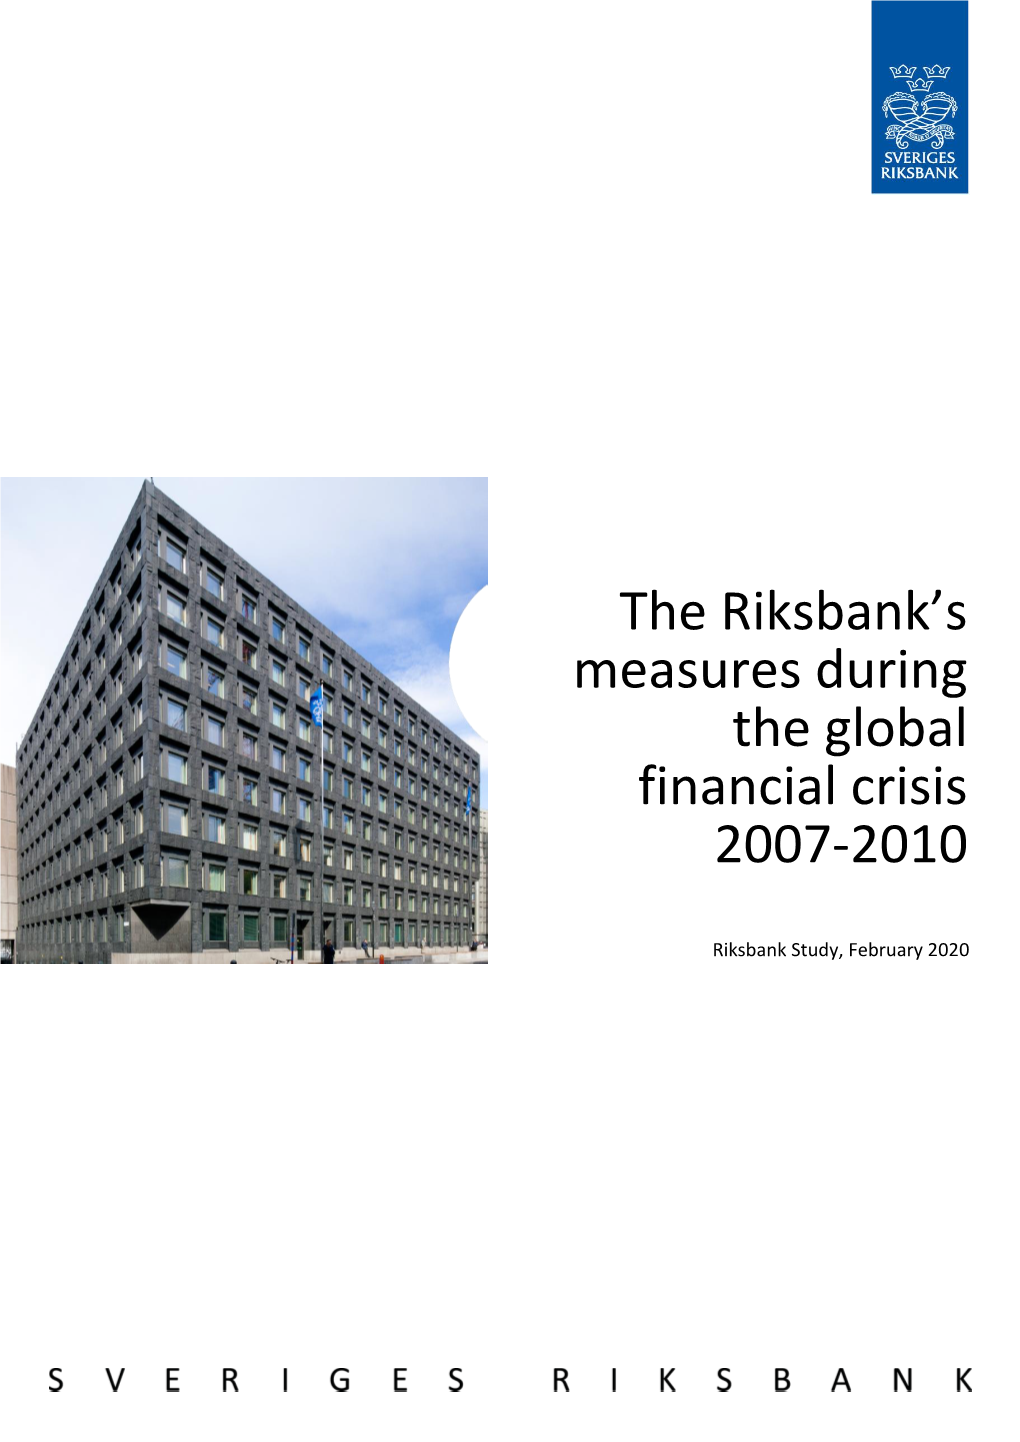 The Riksbank's Measures During the Global Financial Crisis 2007-2010